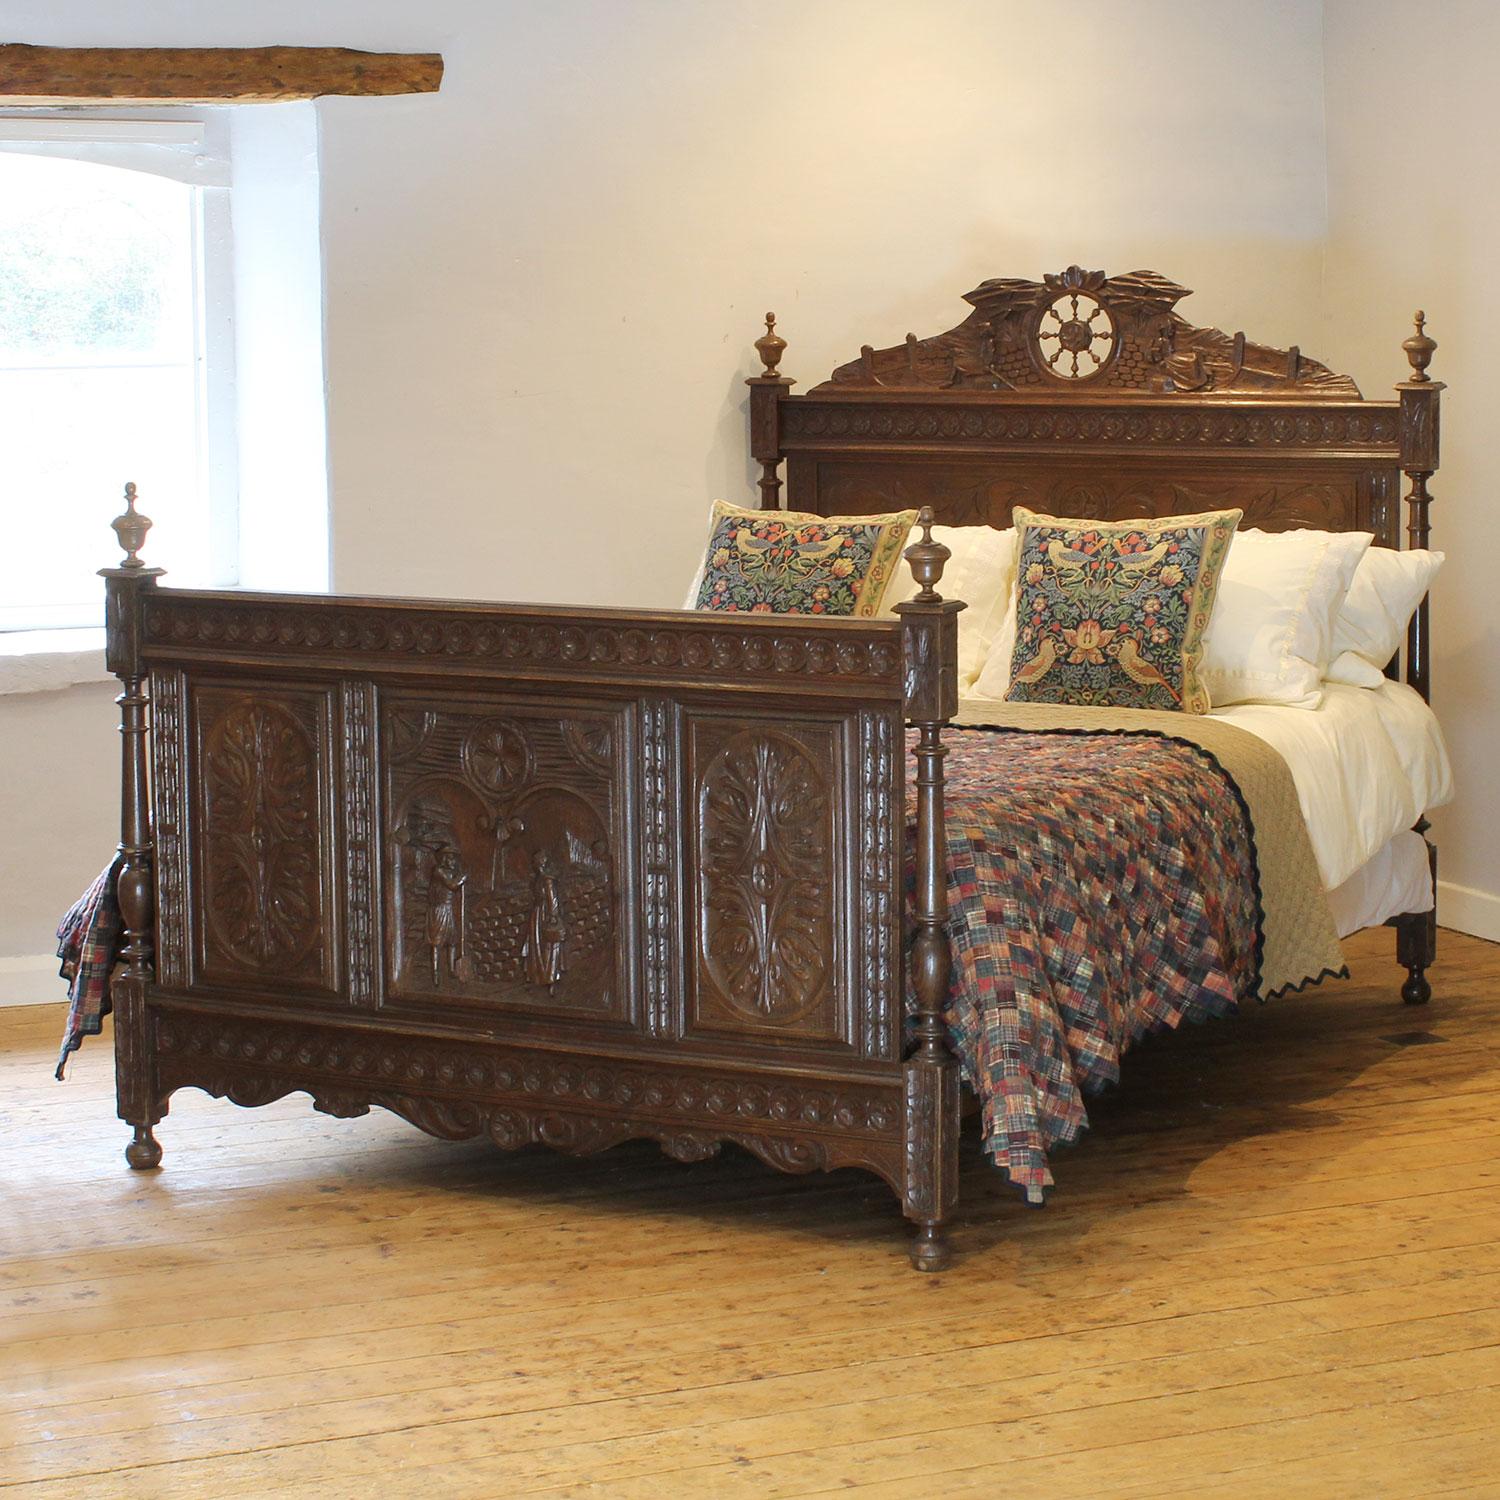 A superbly carved bed in oak with decoratively panels featuring rural figures.

This bed accepts a British king size or American queen size, 5ft wide (60 inches or 150cm) base and mattress set, with an overlap (as shown)

The price includes a